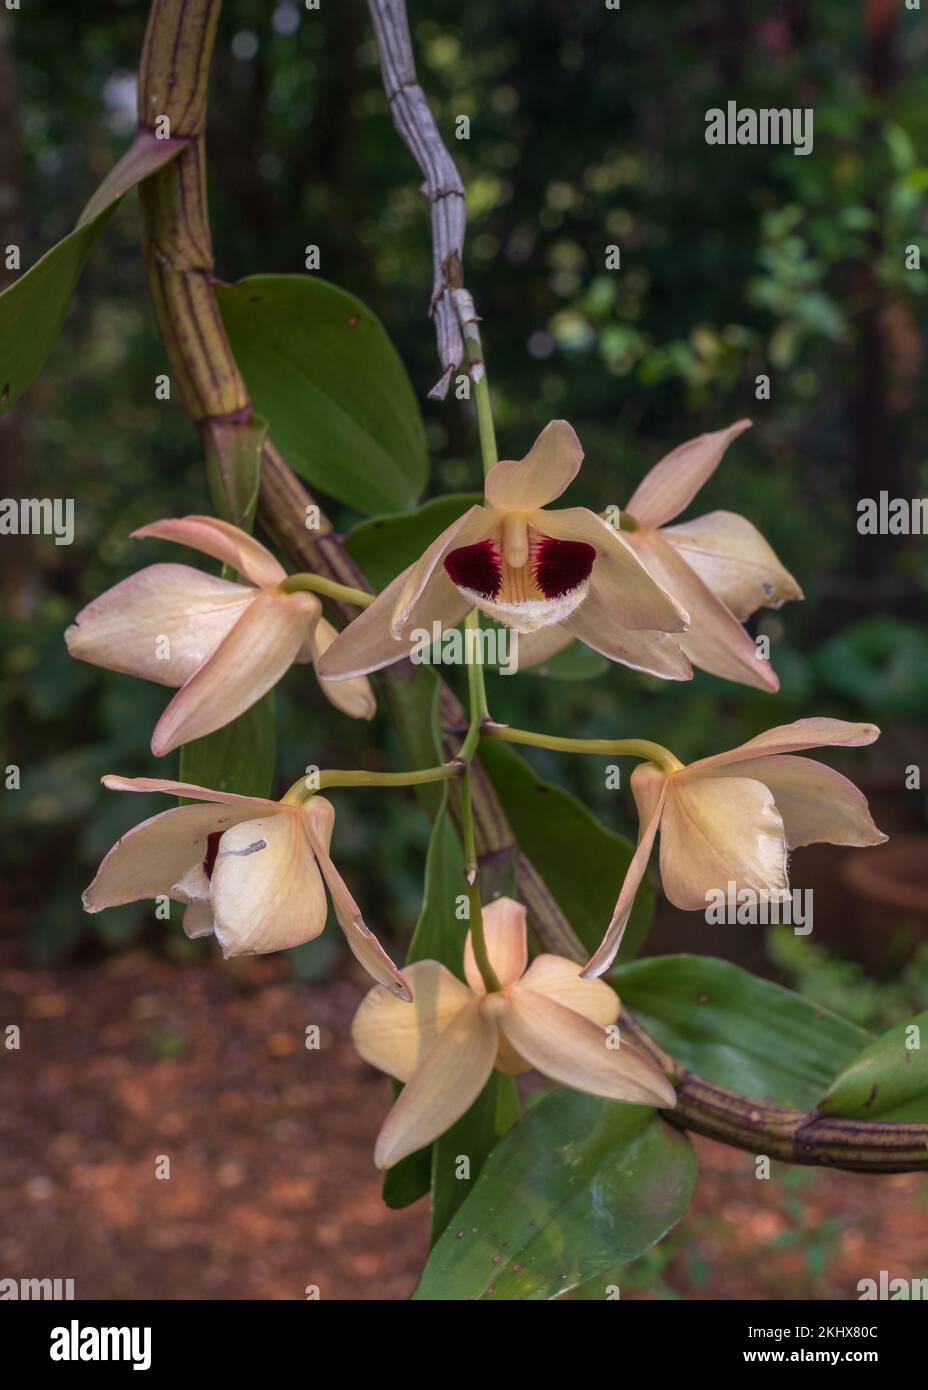 Closeup view of epiphytic orchid species dendrobium pulchellum aka charming dendrobium cream white and purple flowers outdoors on garden background Stock Photo